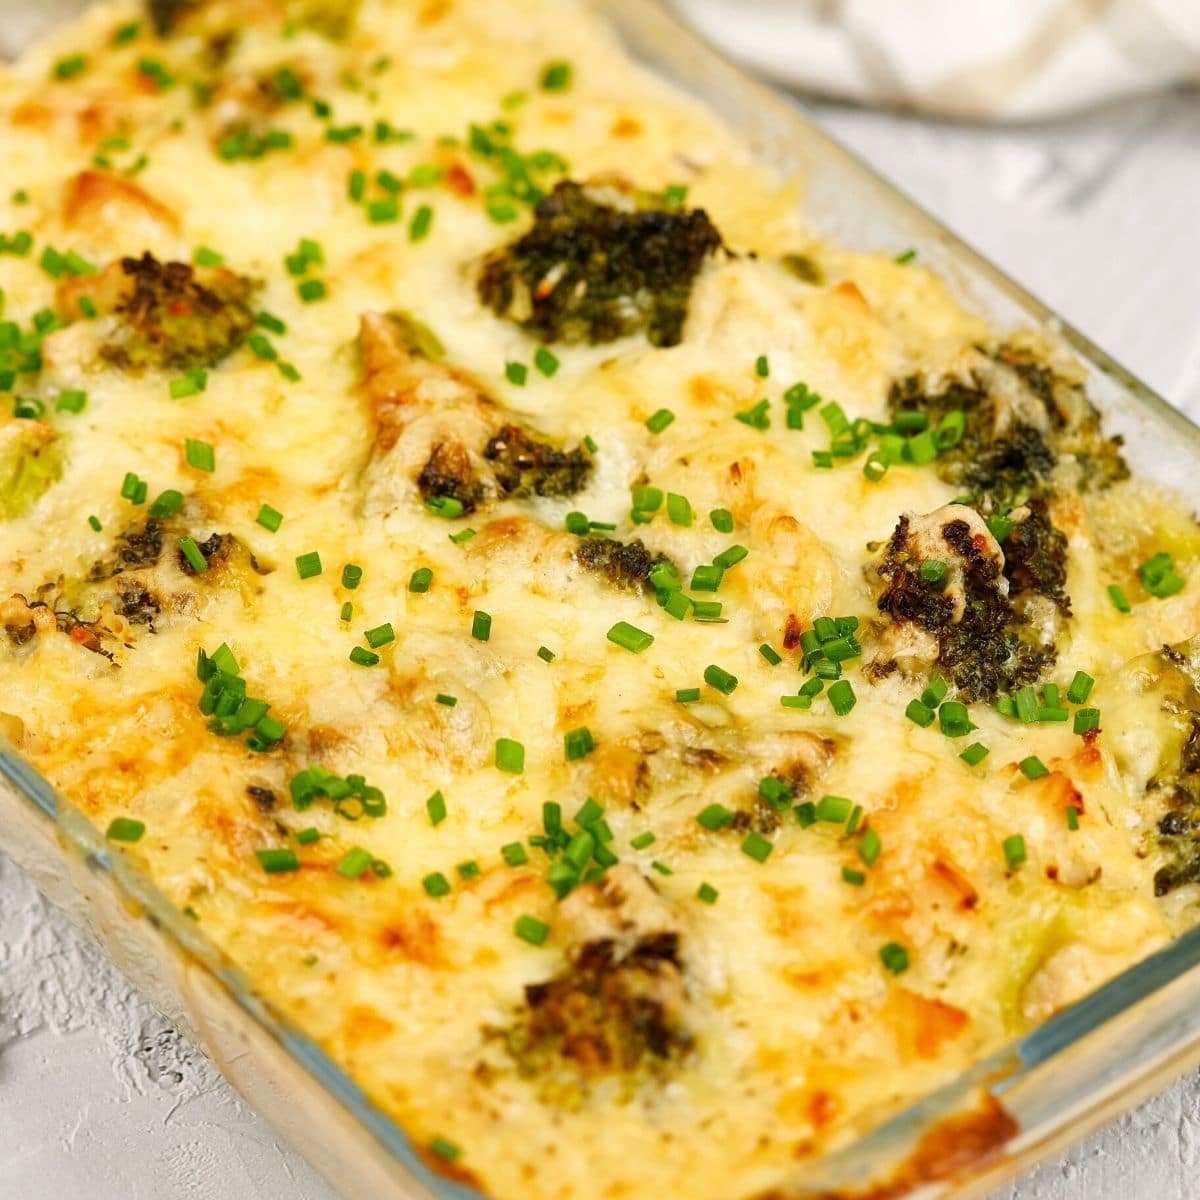 Chicken rice broccoli casserole freshly made in a glass dish.